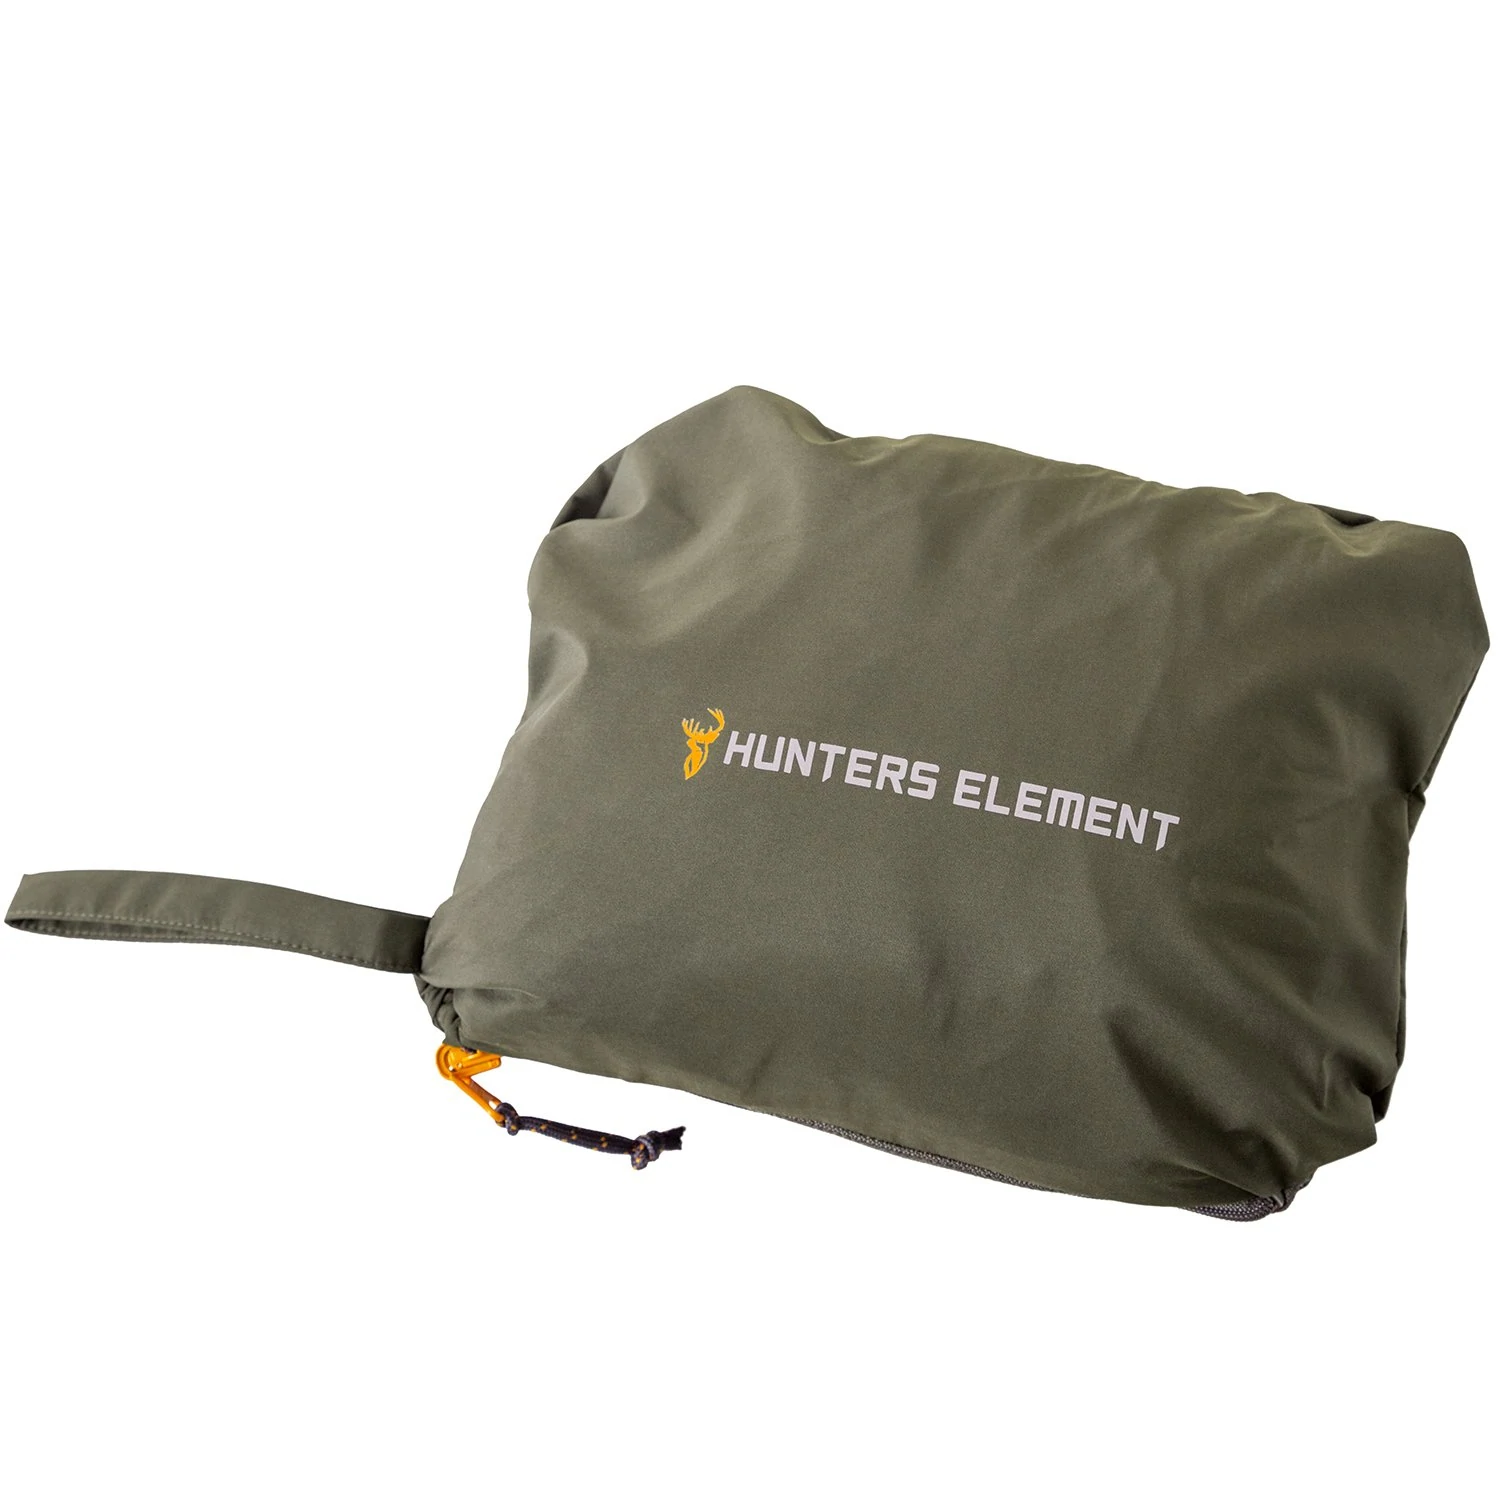 Hunters Element Halo Jacket - Desolve Veil -  - Mansfield Hunting & Fishing - Products to prepare for Corona Virus